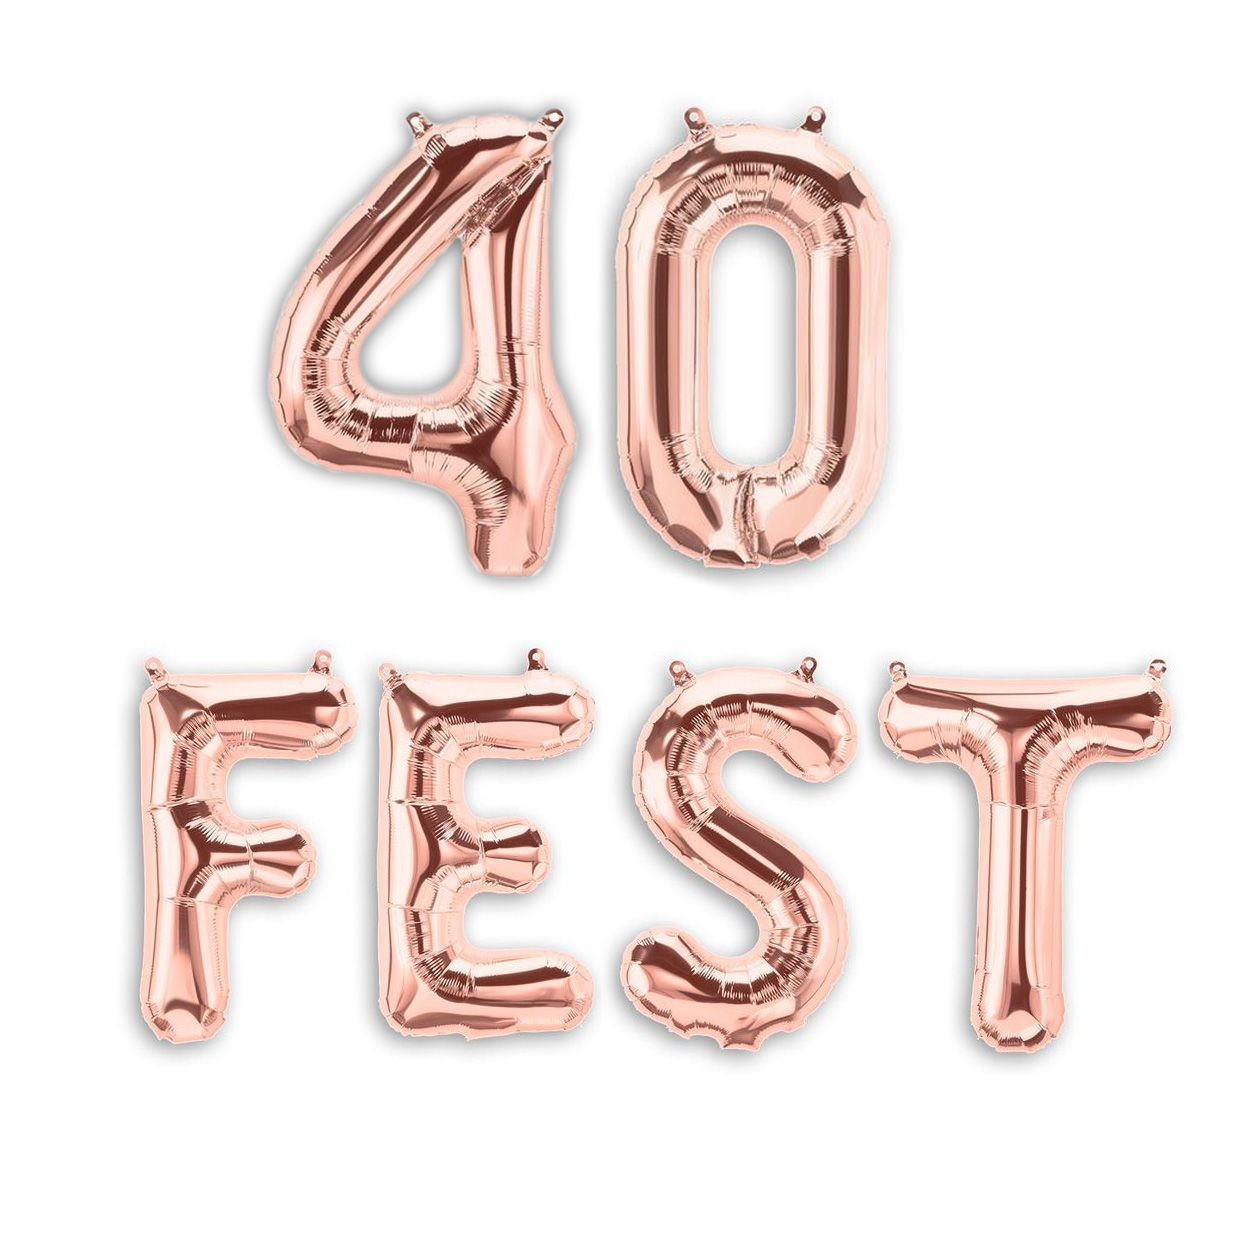 ROSE GOLD 40fest 40th birthday party foil balloons